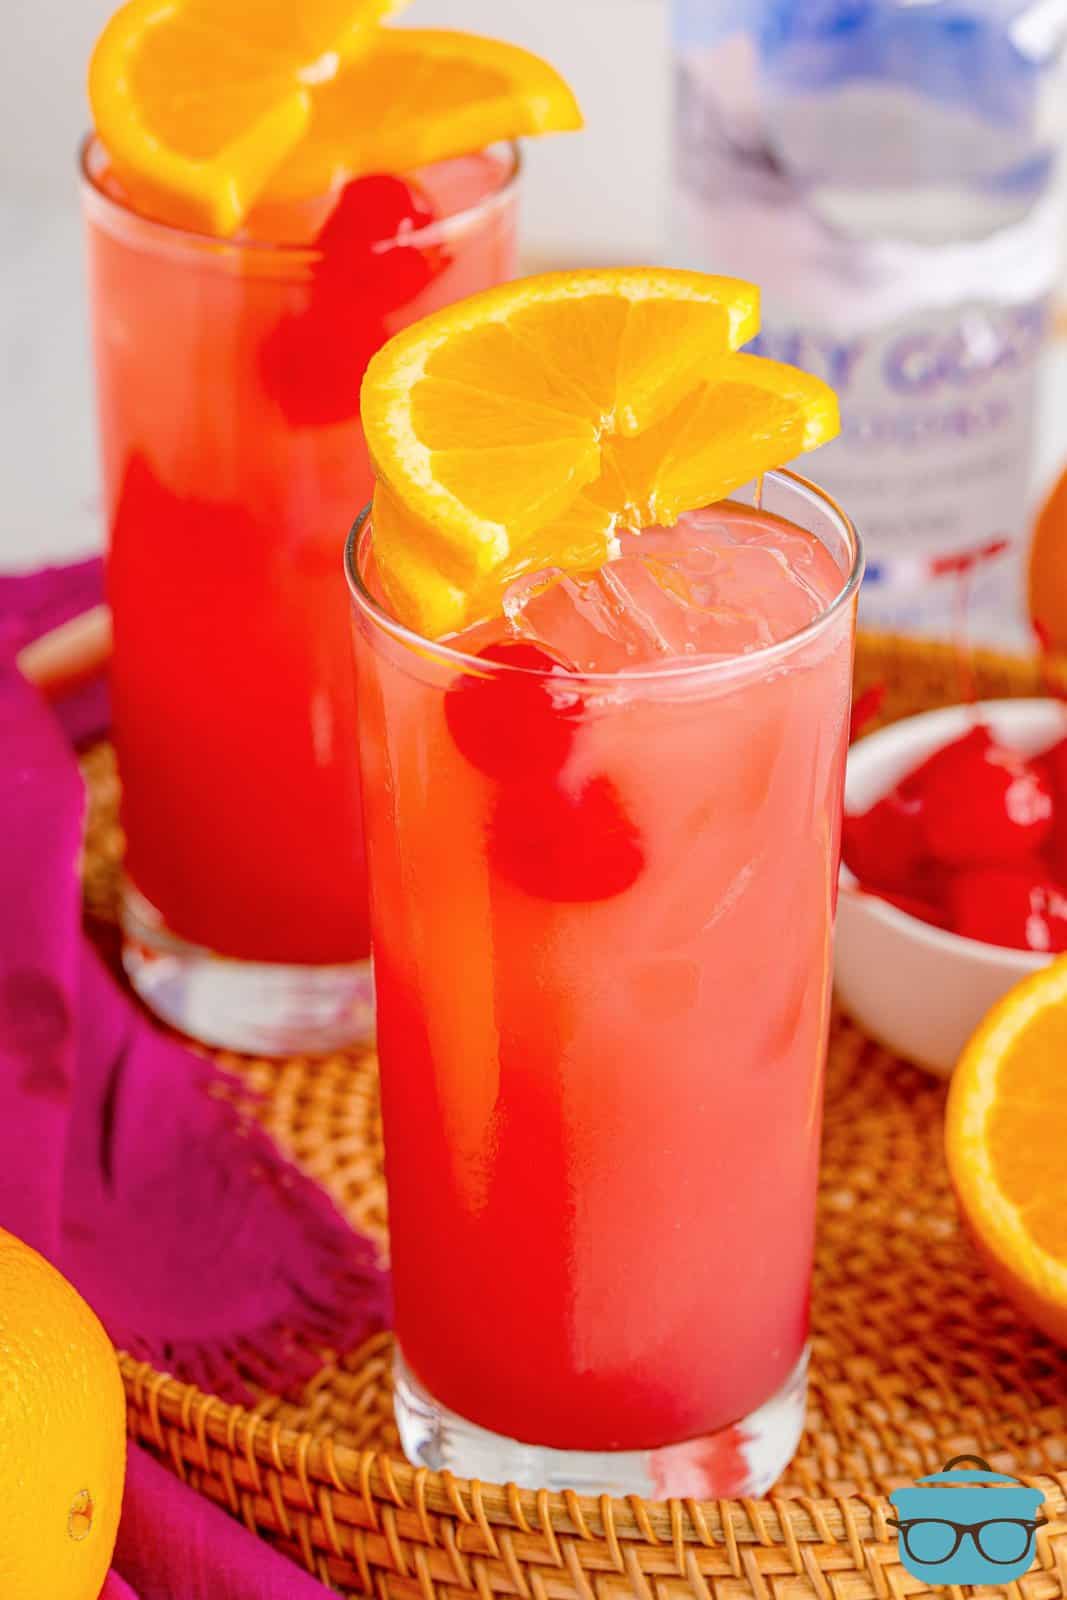 Two glasses of Sex on the Beach with cherry and orange garnishes.